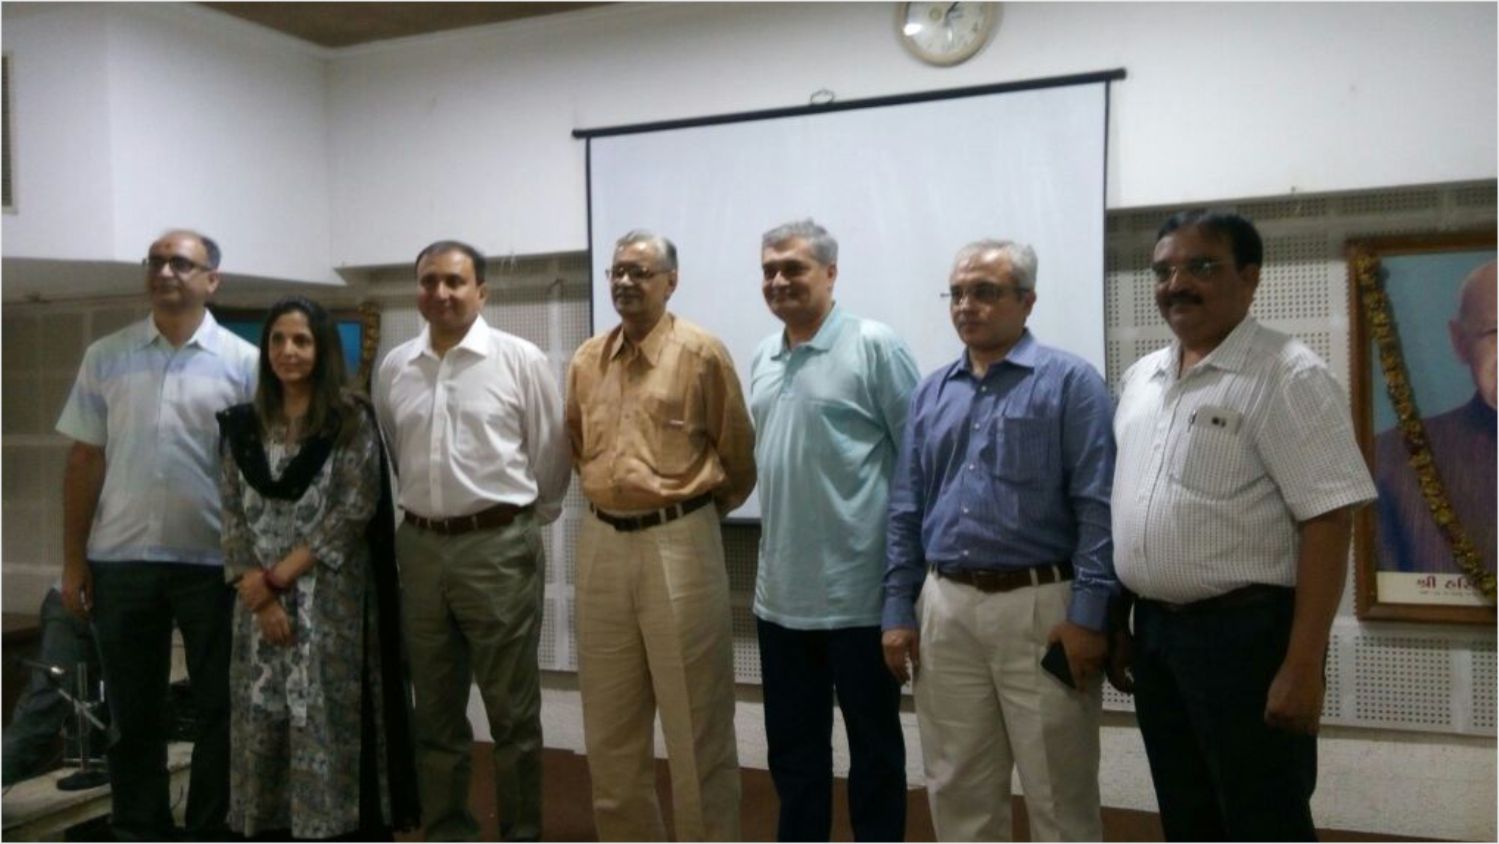 Dr. Sunil Anand, Alka Anand (Co-Founder Ananda Wellness) and committee members of HMAI Ahmedabad.